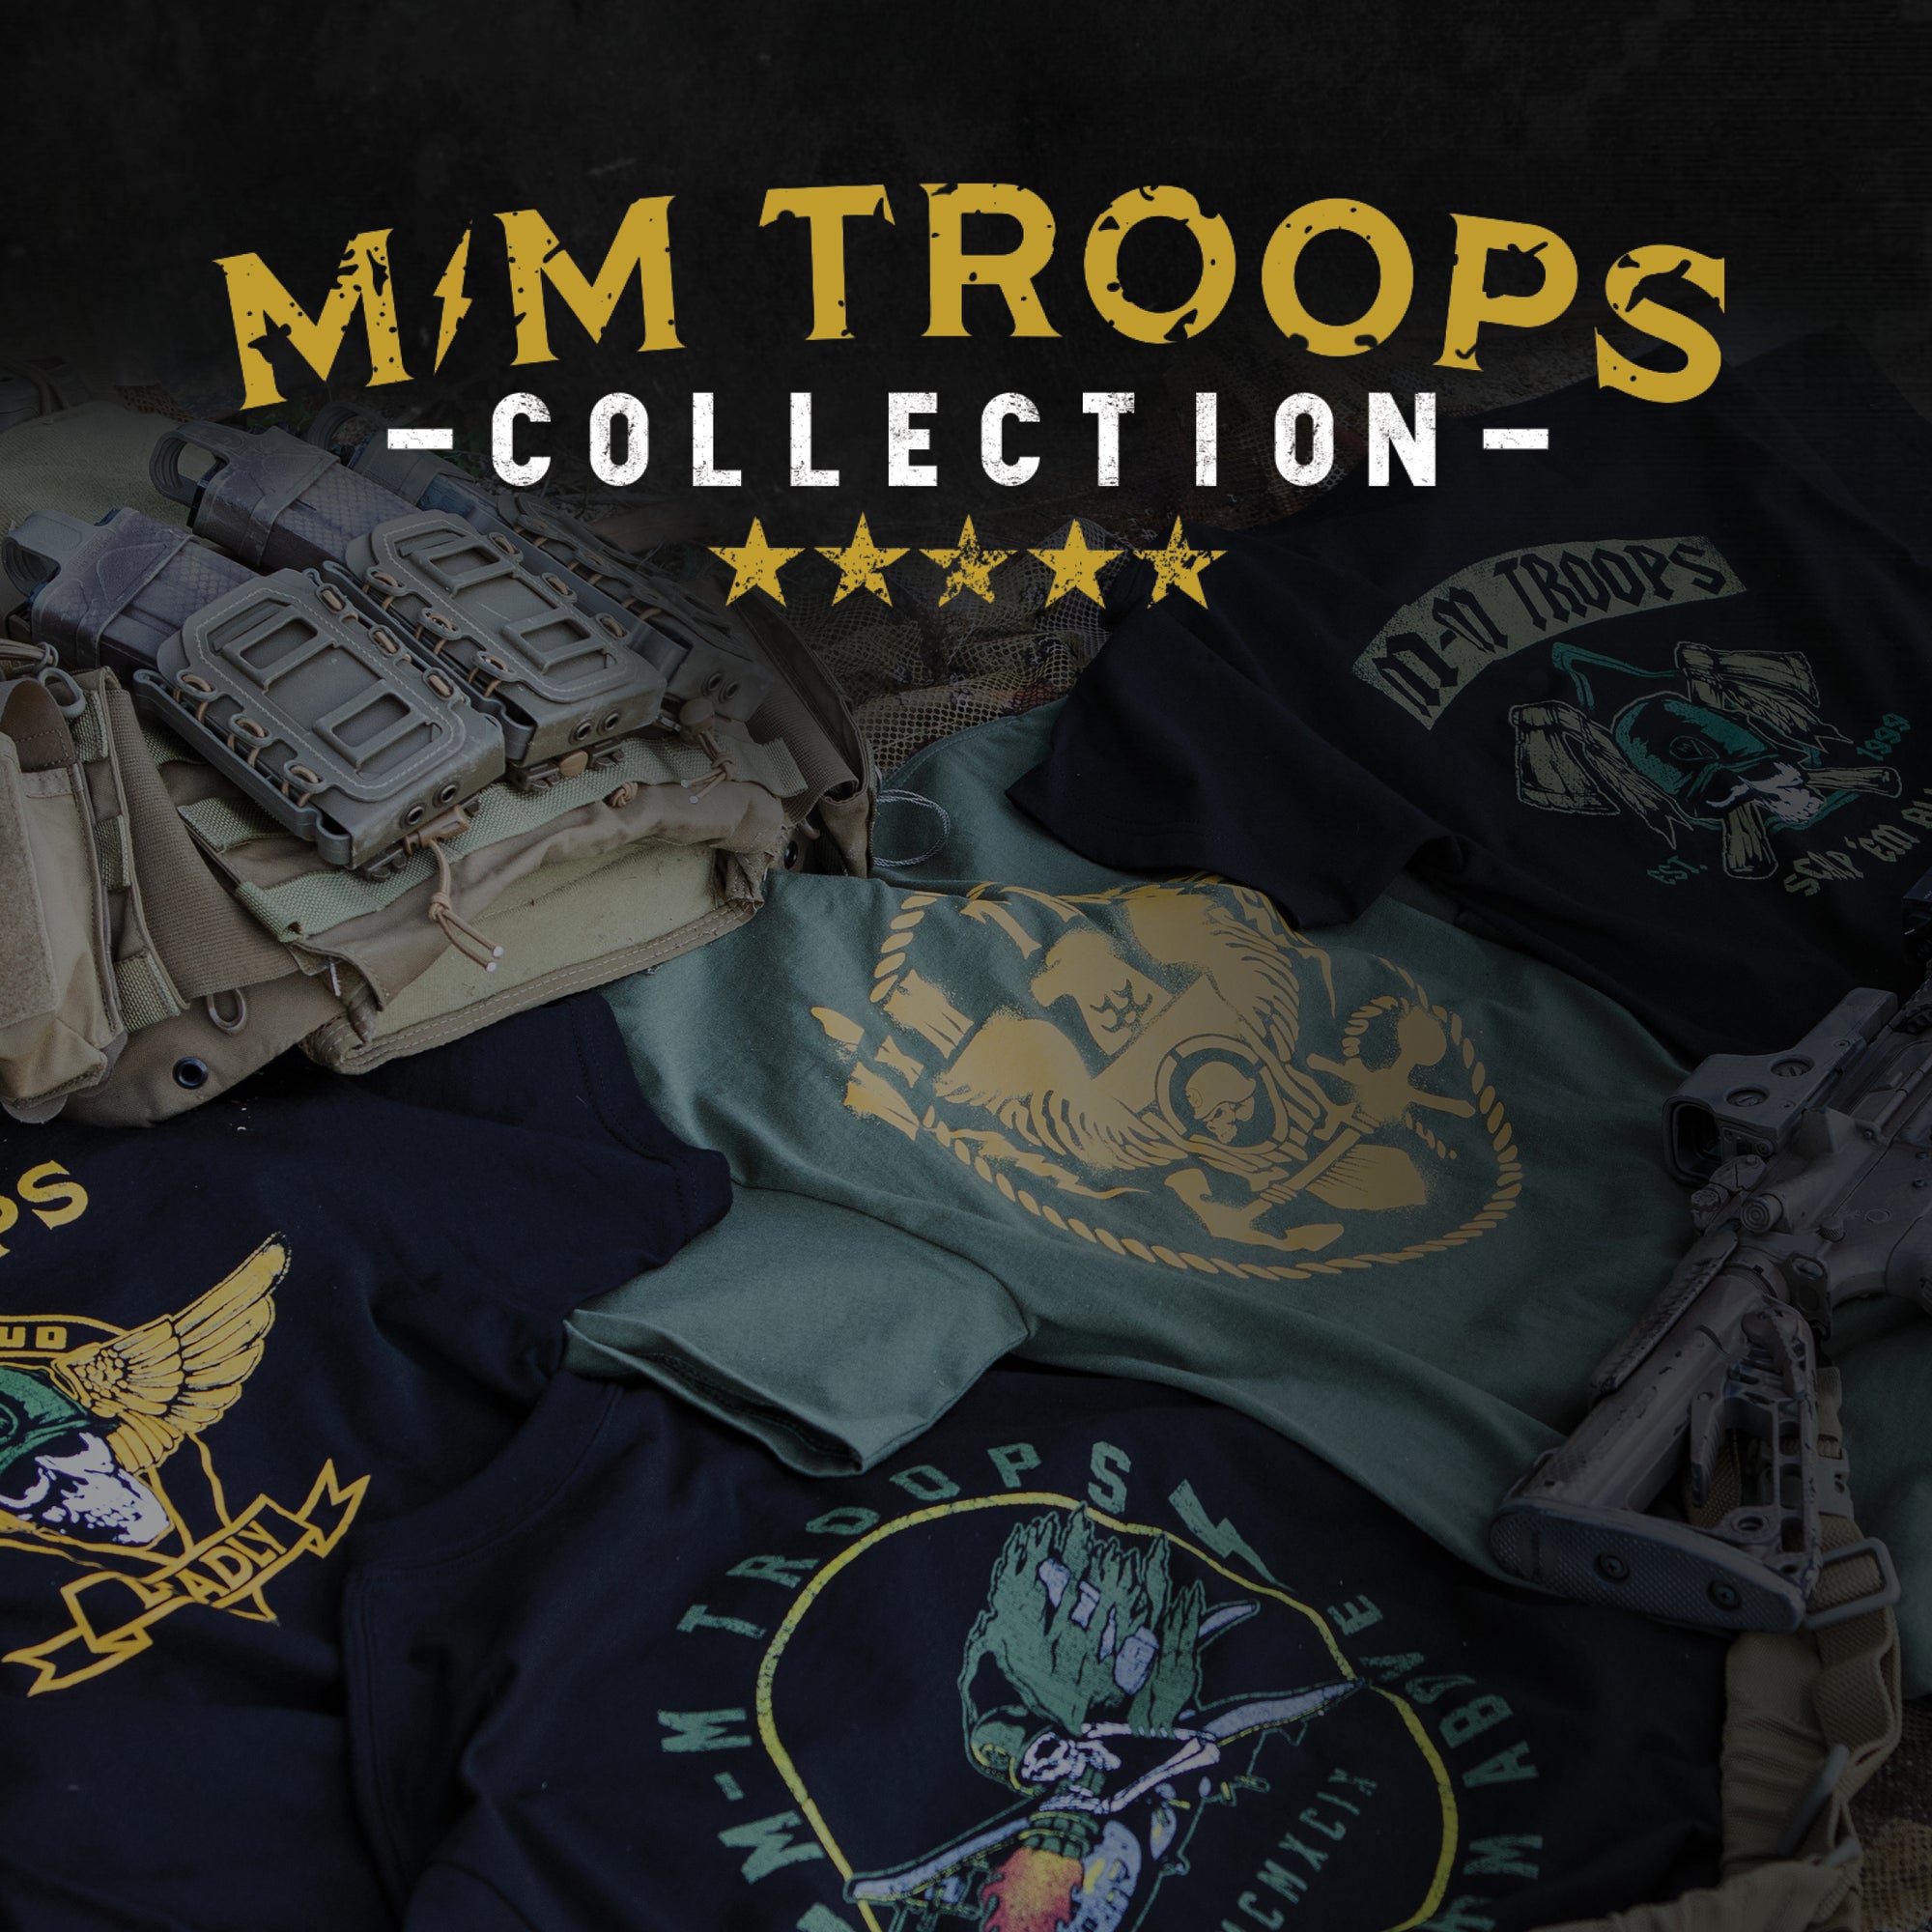 Giving Back Through the M/M Troops Collection